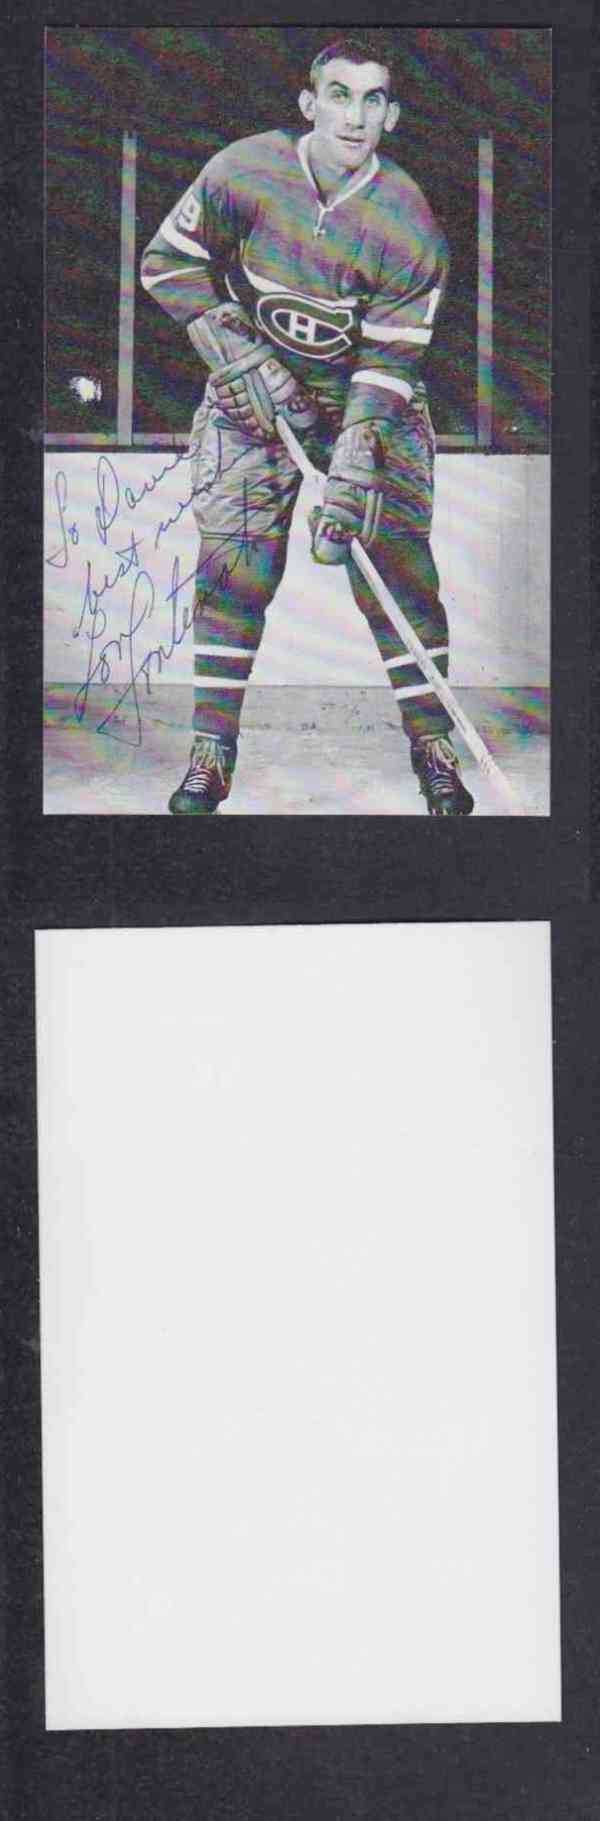 1960 'S MONTREAL CANADIENS L.FONTINATO  AUTOGRAPHED POST CARD  photo